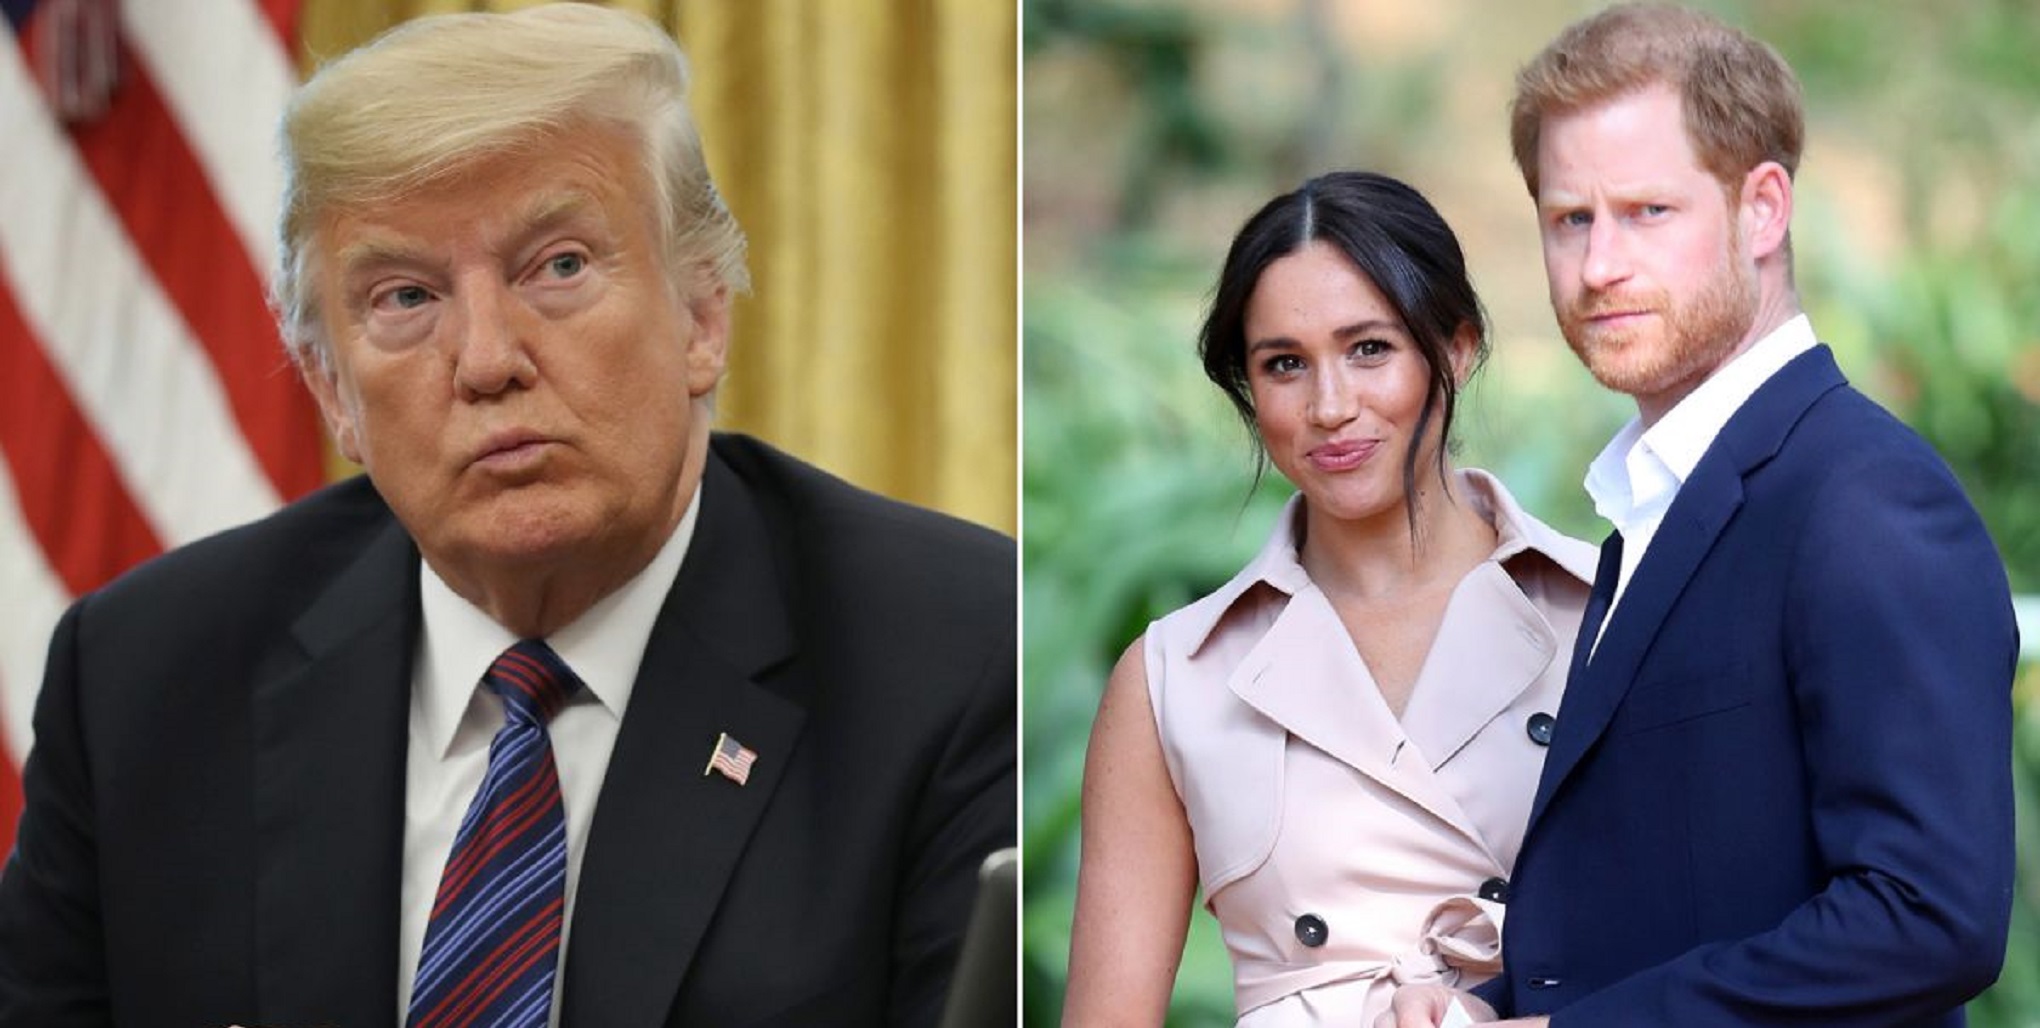 Trump: Will Not Pay For Prince Harry, Meghan Markle’s Security